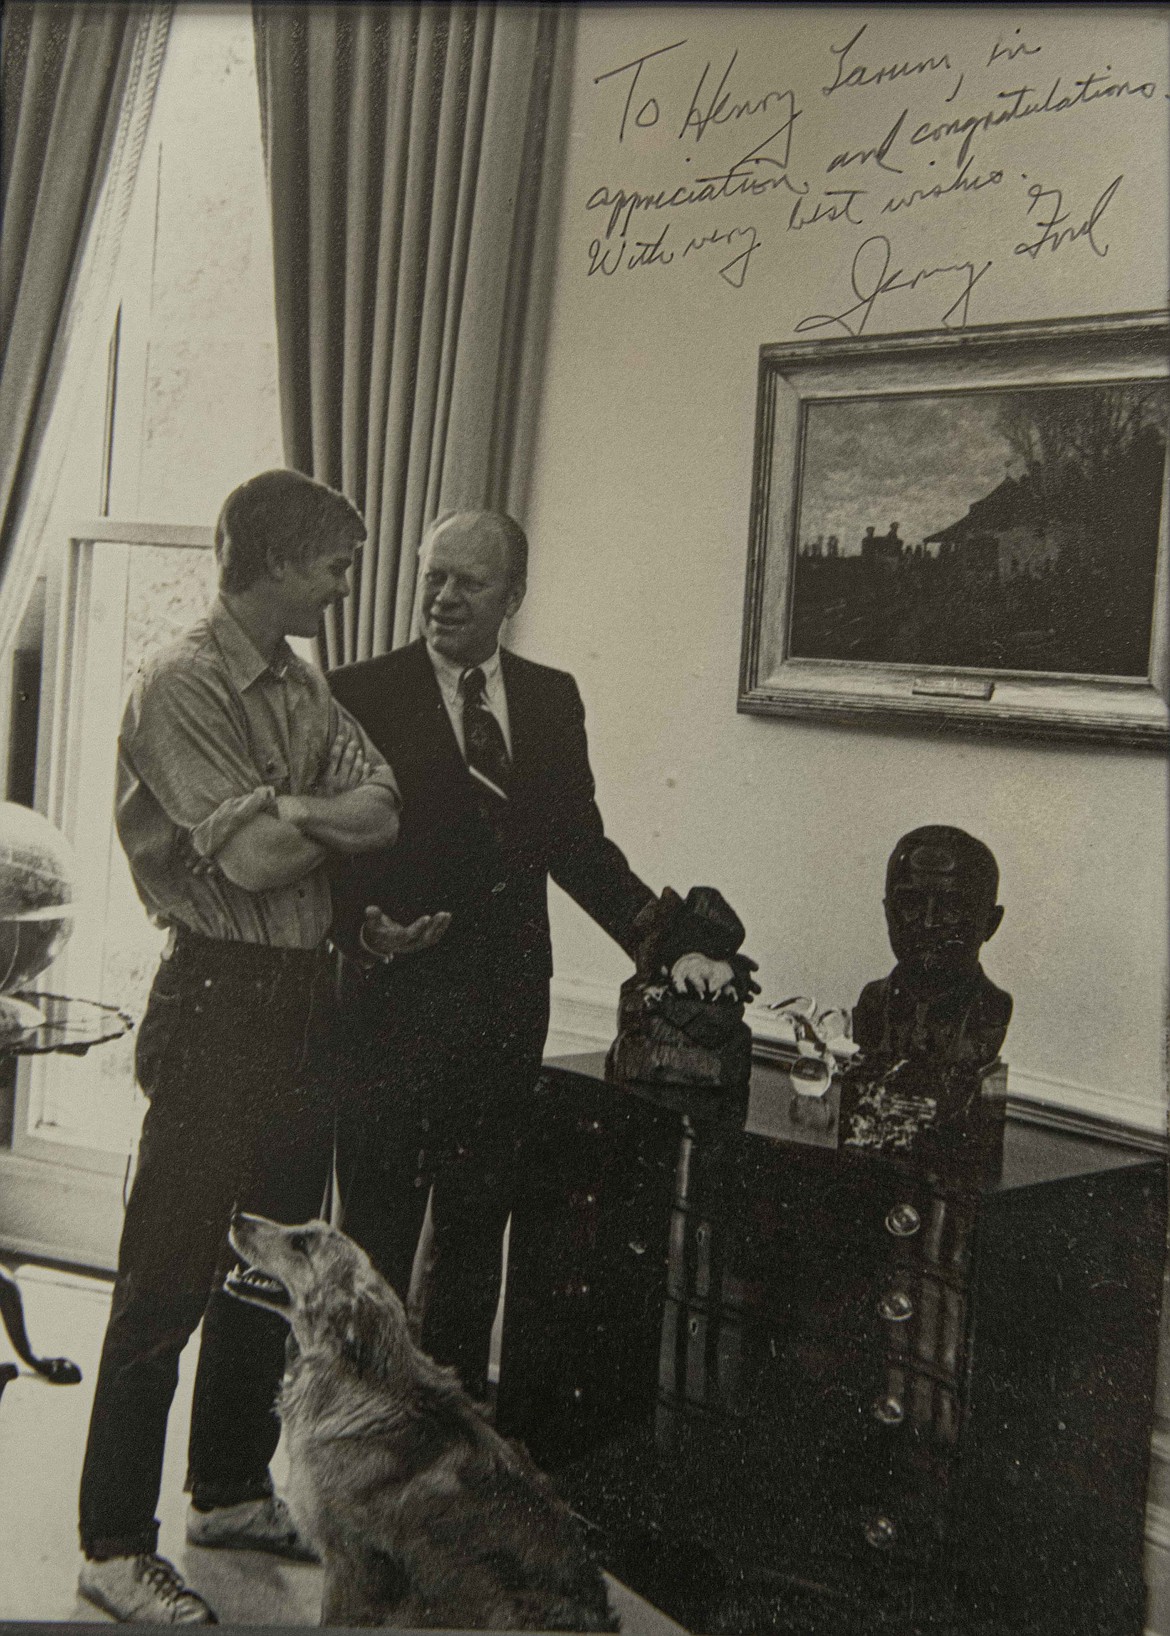 Steve and Gerald Ford with Henry Larum's carving in the Oval Office. (White House Press Photo)